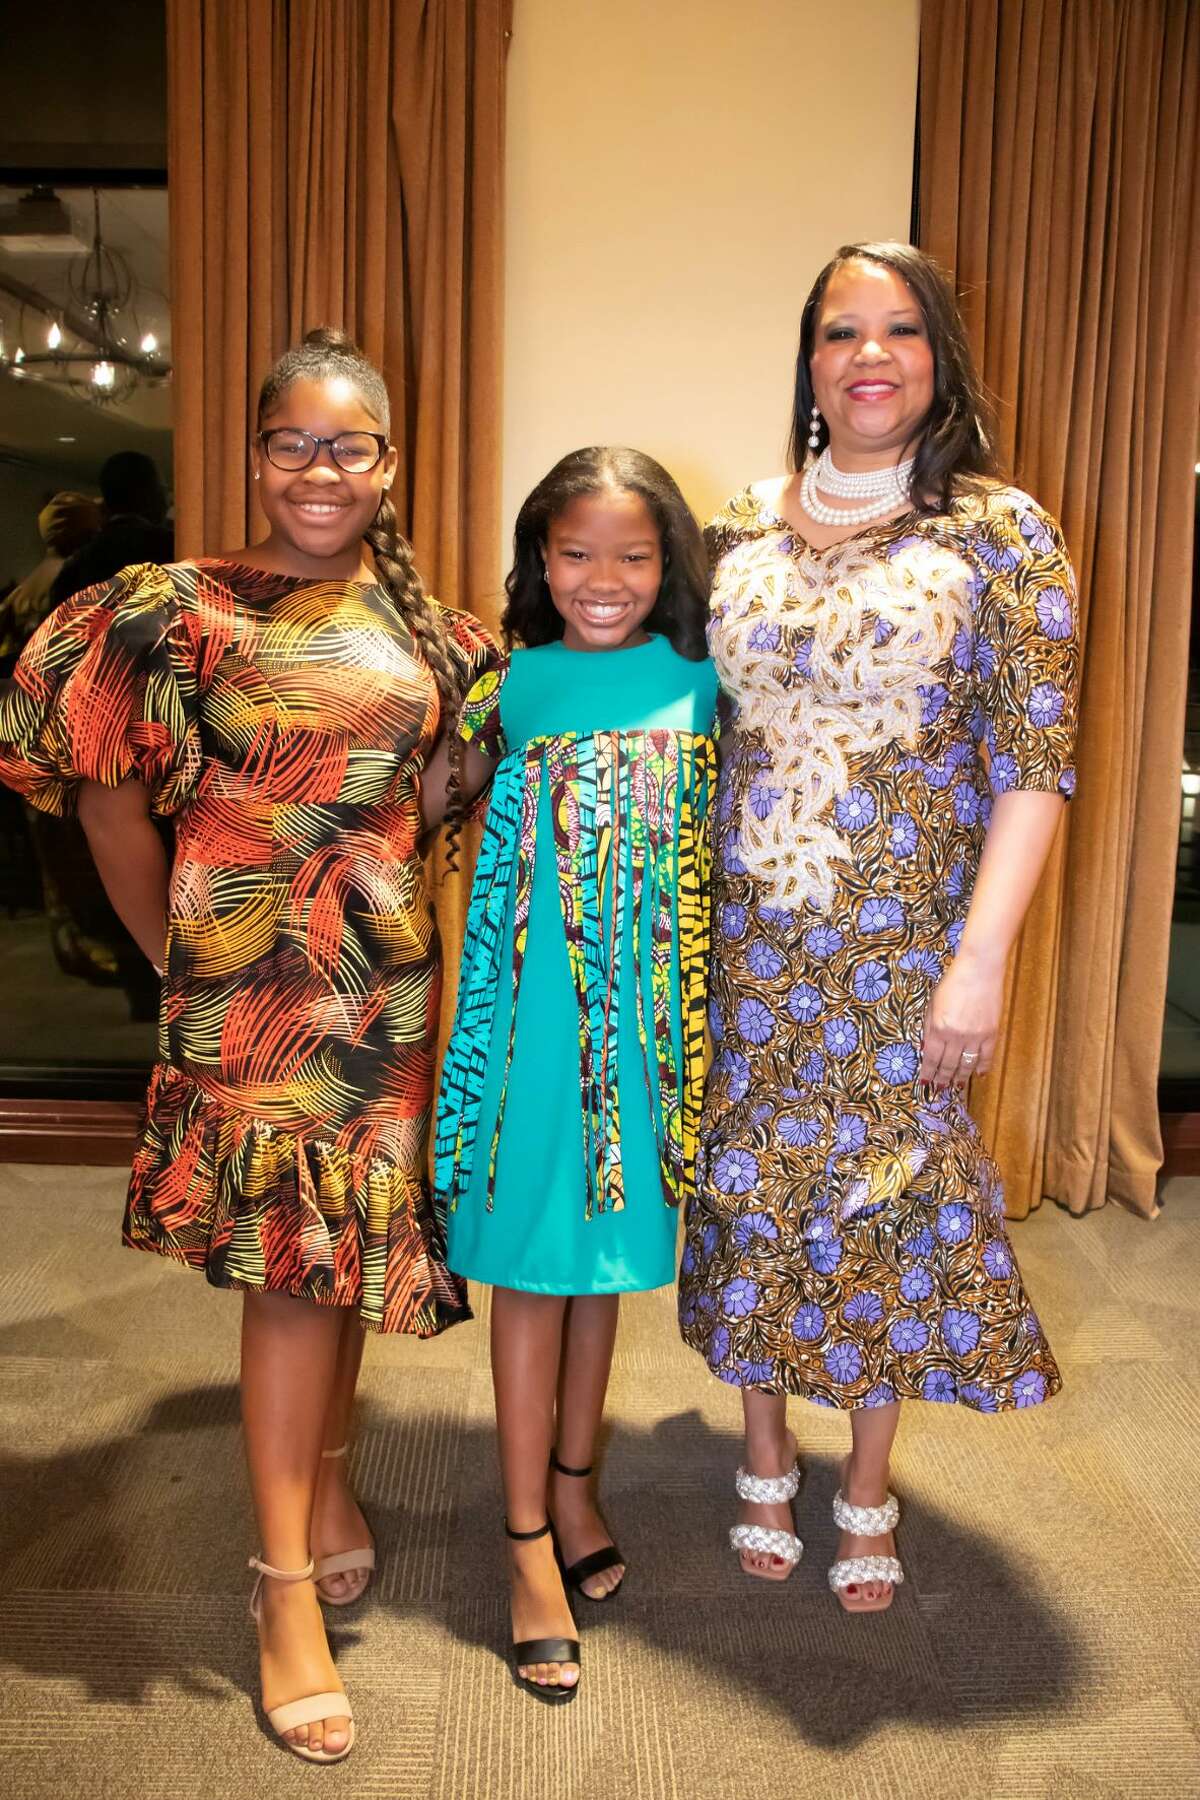 Guests were treated to a fashion show courtesy of Missouri City- based Nigerian designer Atinuke James. Her clothing line, Adunni James, features African and contemporary custom-tailored outfits for men and women.